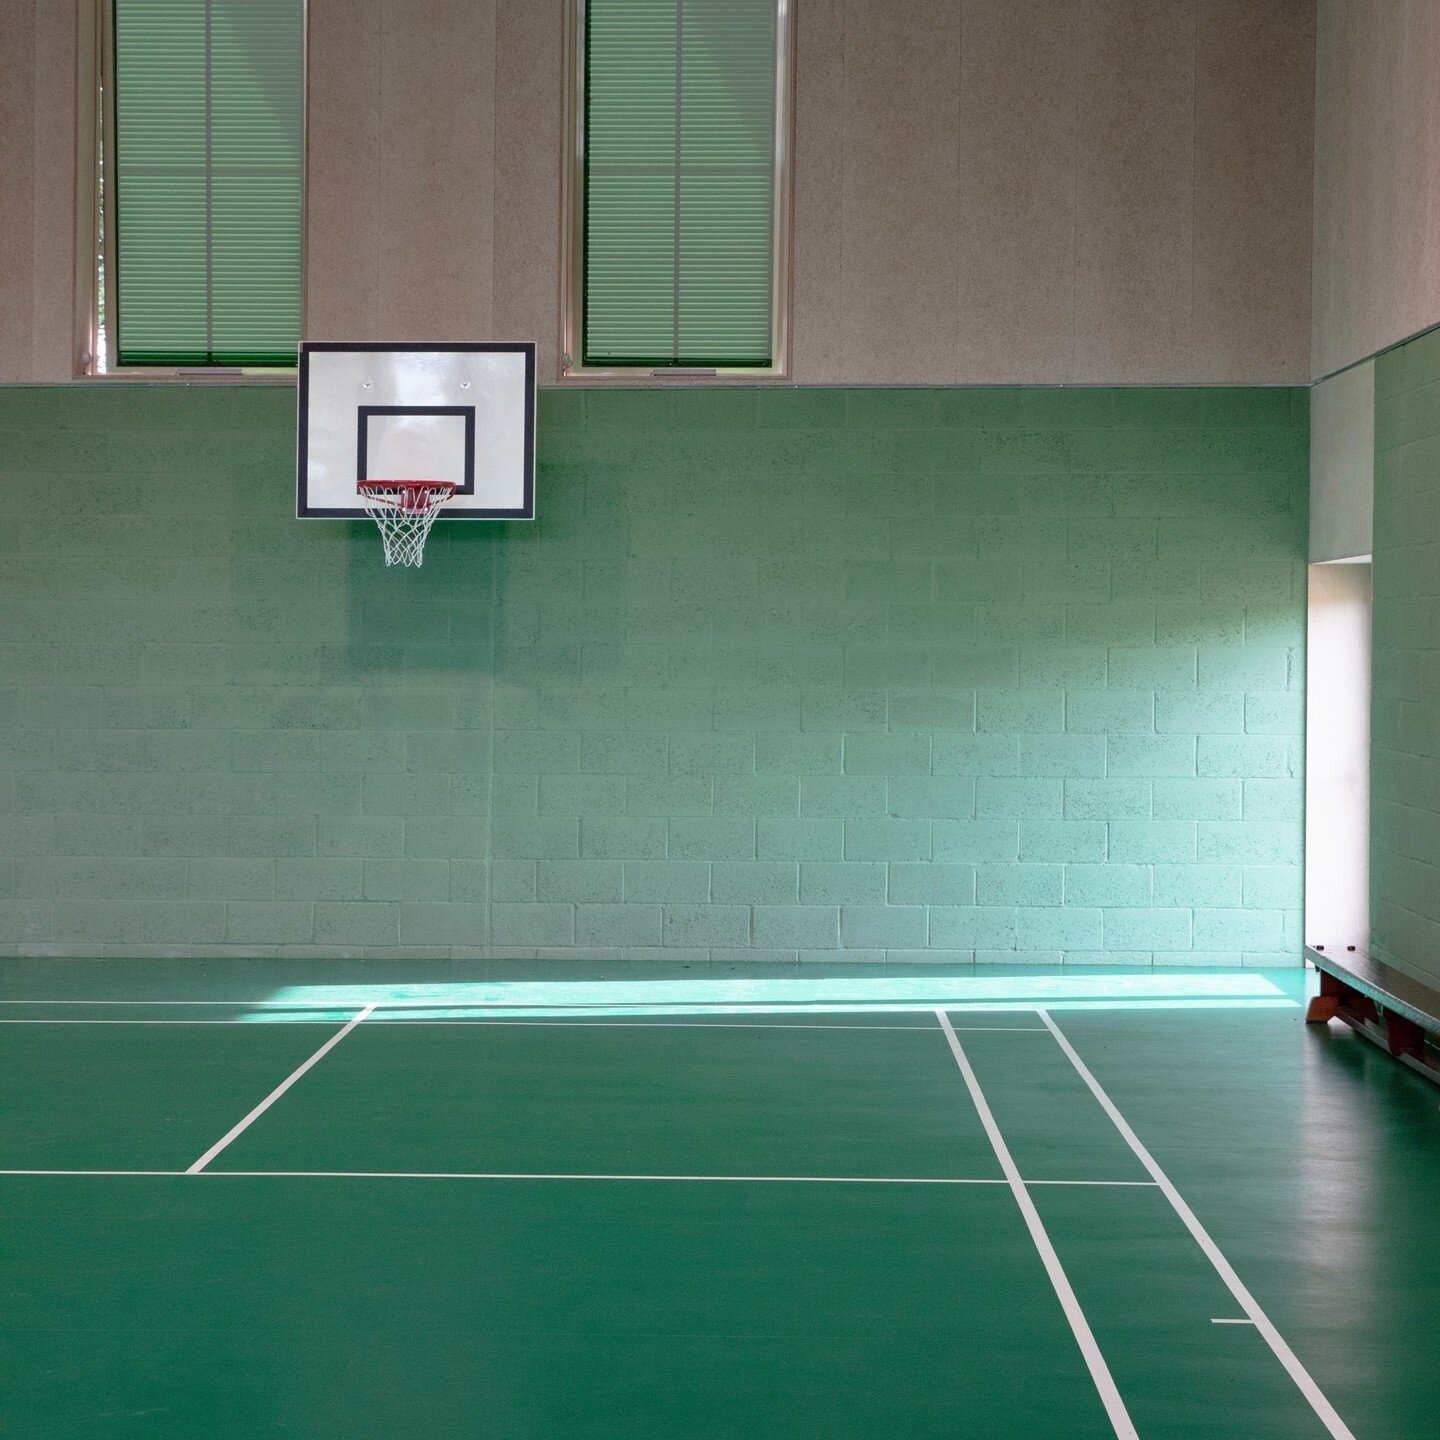 St Faith's Sports Hall ⁠🟢♻️

Green in more ways than one! ⁠

Generous north light windows introduce natural daylight into the space. The materials which include cement fibre board, recycle acoustic wood panels and painted block work are unfussy and 